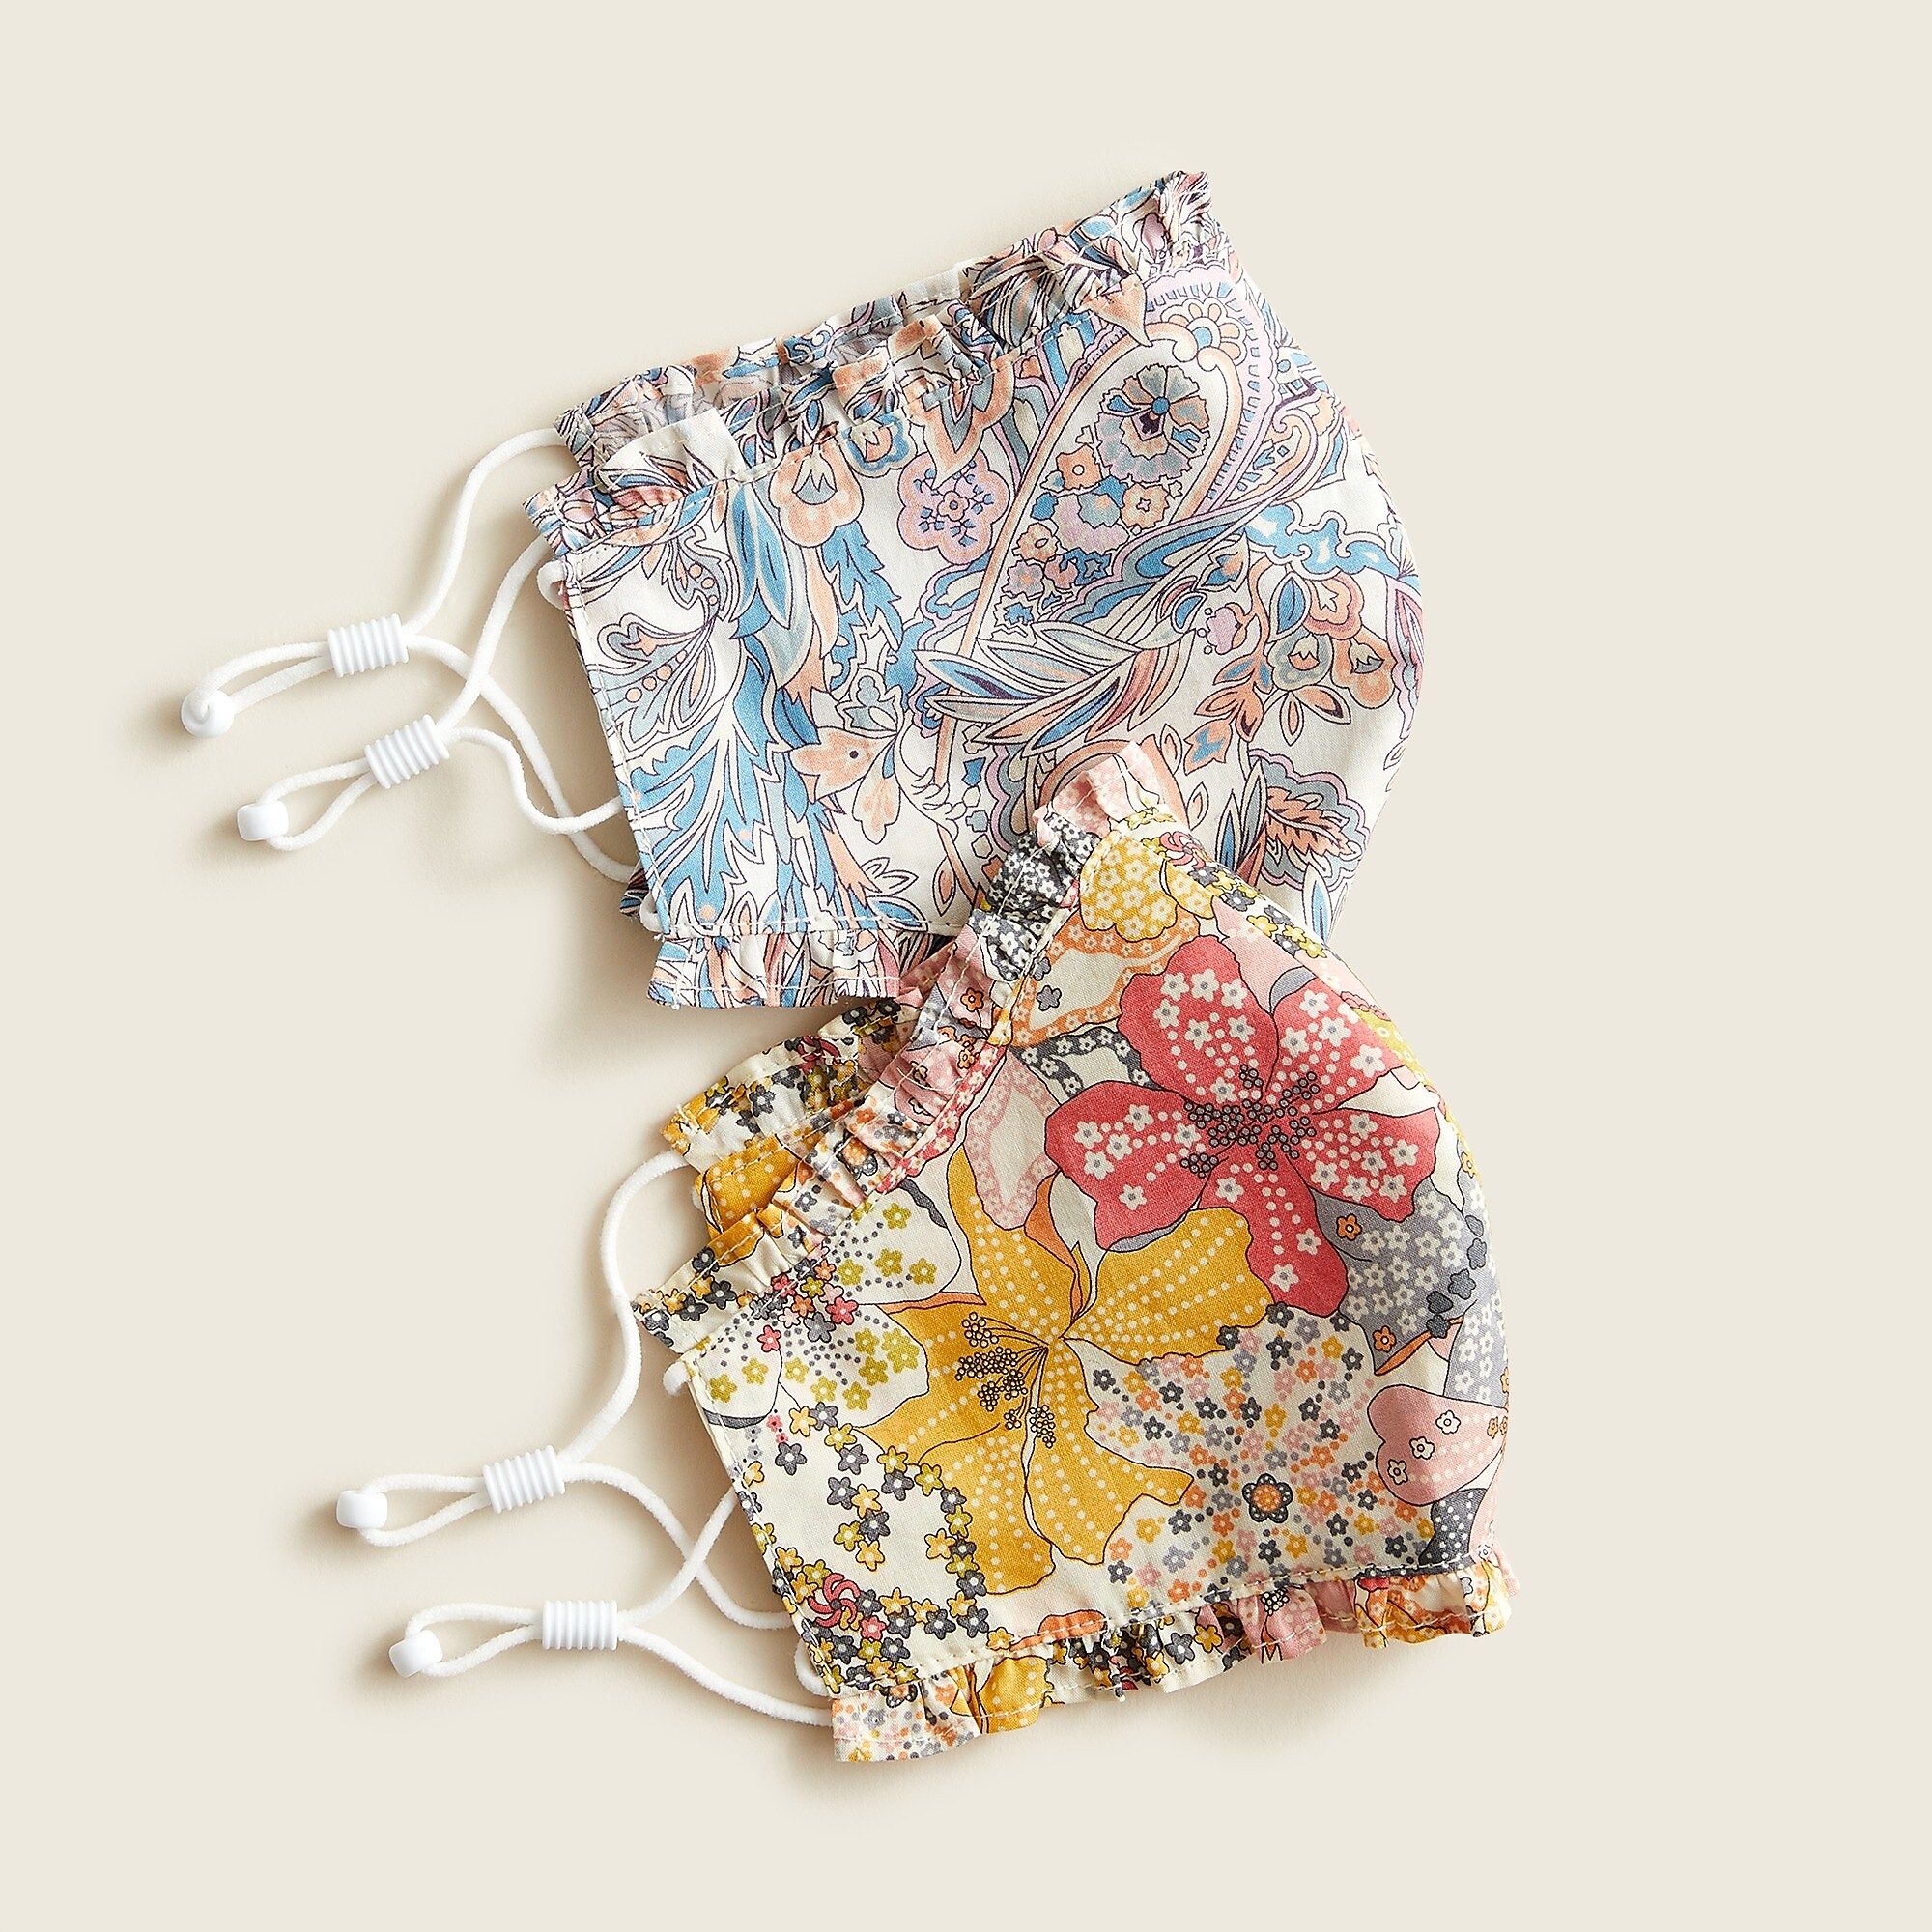 Pack-of-two nonmedical face masks in Liberty® florals | J.Crew US